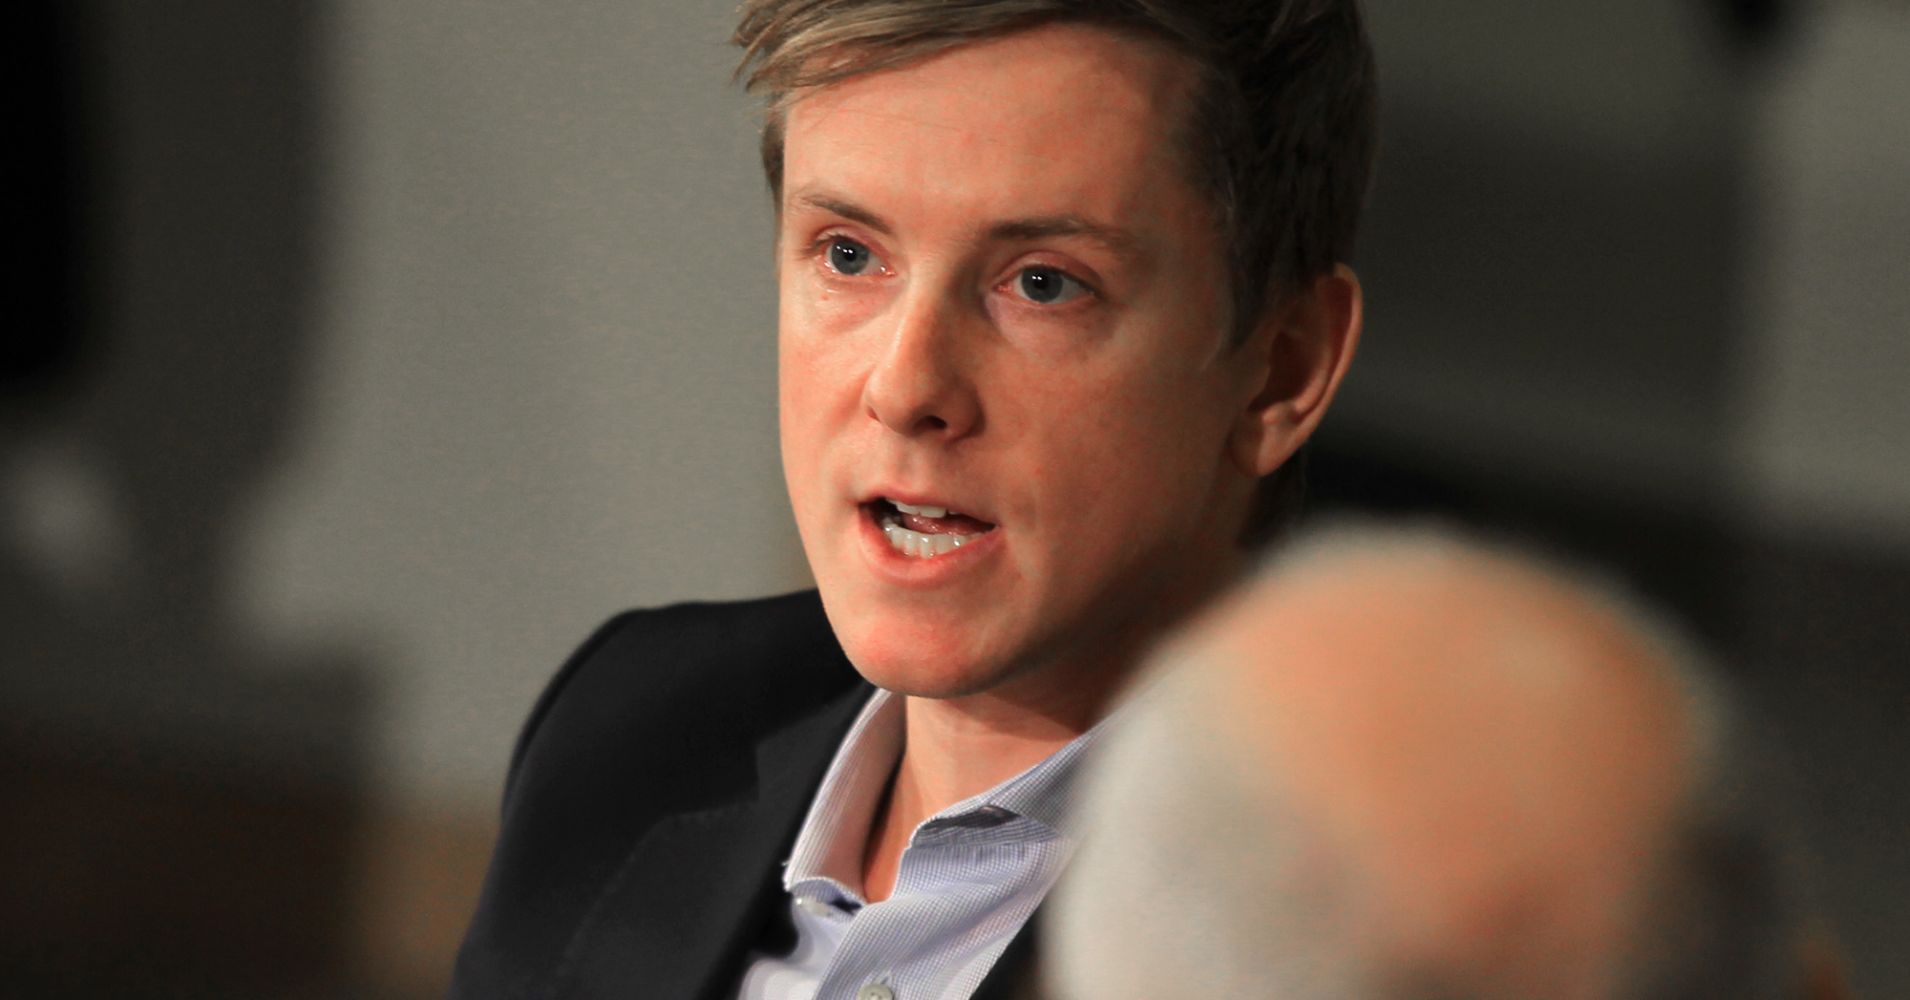 Facebook co-founder Chris Hughes calls for the company to be broken up